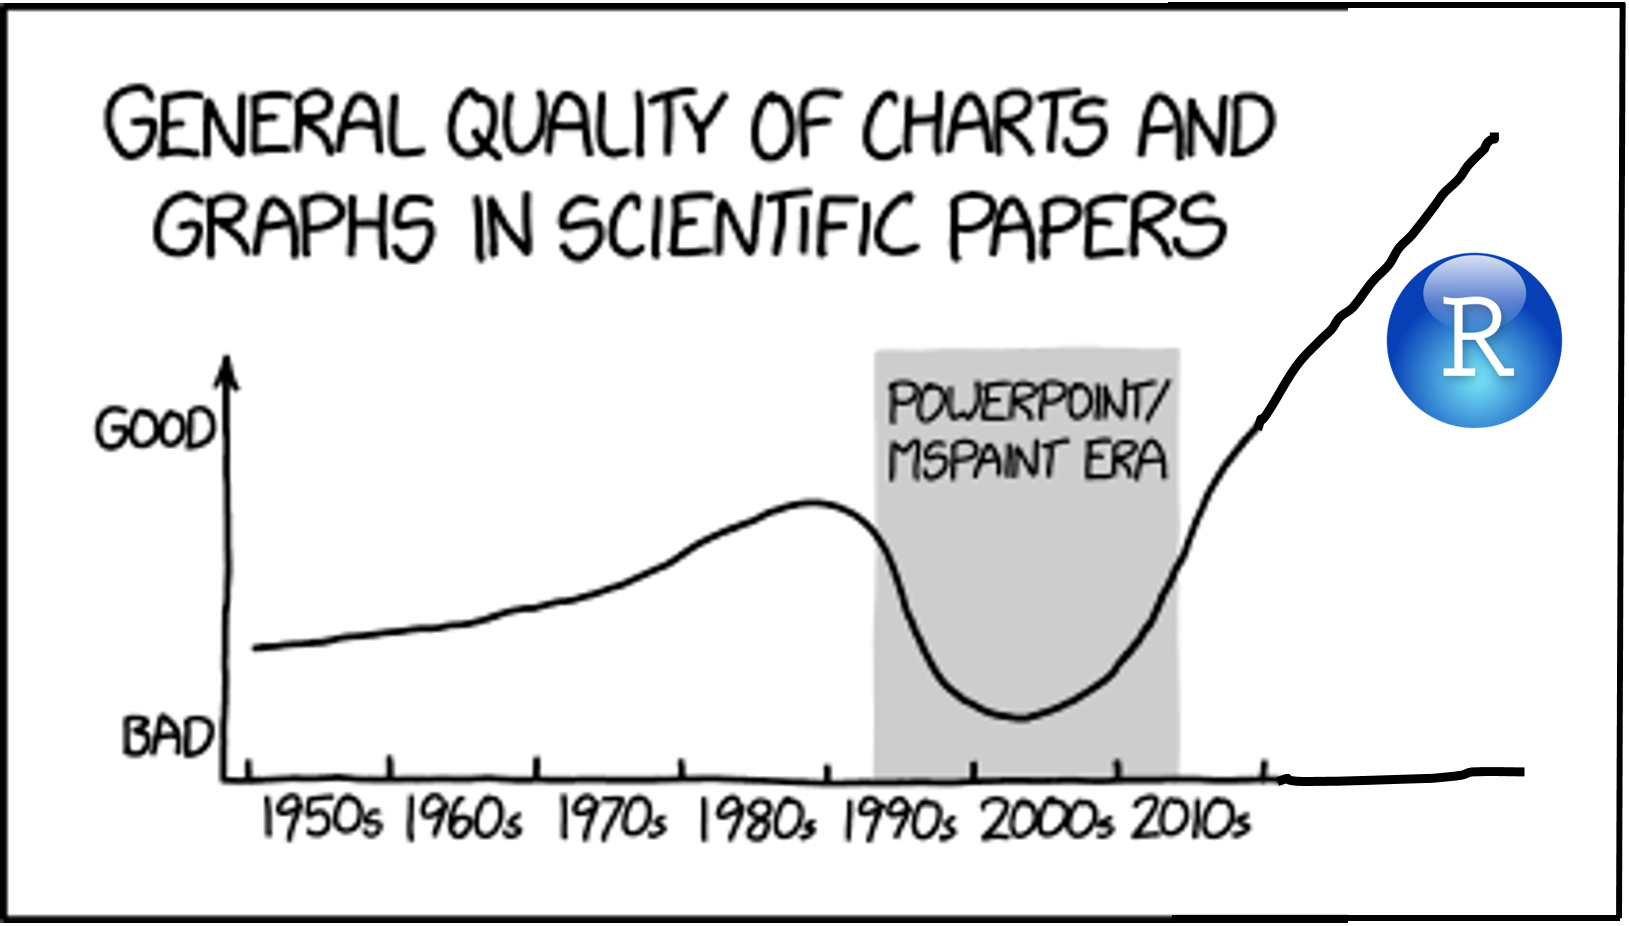 xkcd comic titled 'General quality of charts and graphs in scientific papers'; y-axis: BAD on the bottom to GOOD on the top; x-axis: 1950s to 2010s; Line graph increases with time except for a dip between 1990 and 2010 labelled POWERPOINT/MSPAINT ERA